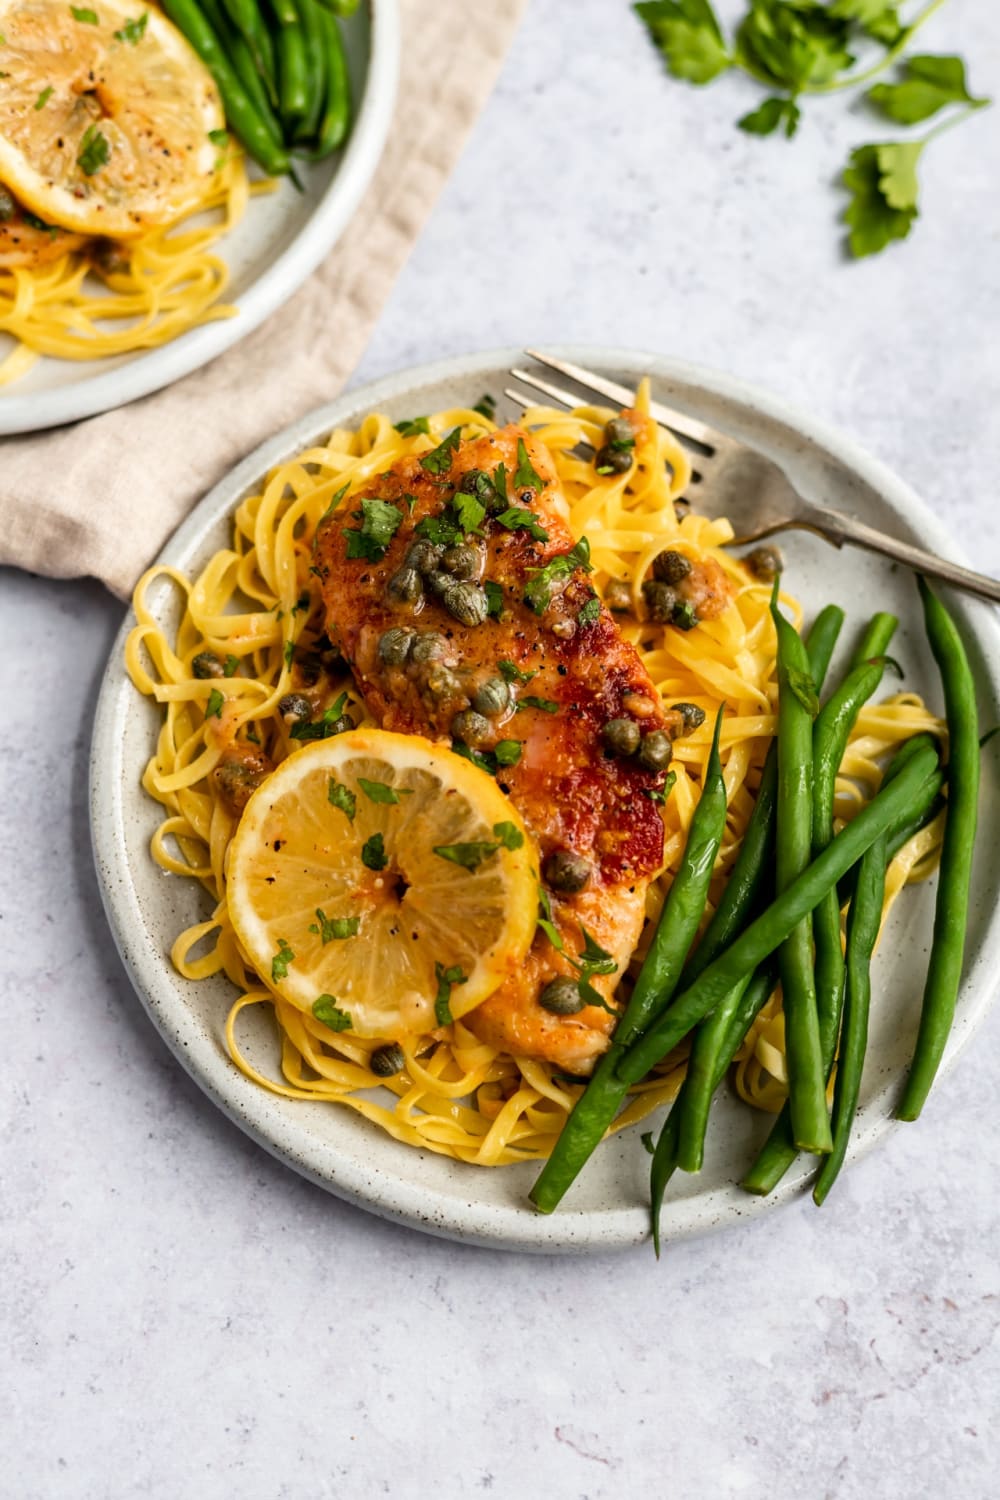 This Chicken Piccata Recipe is a flavorful, easy dinner option.